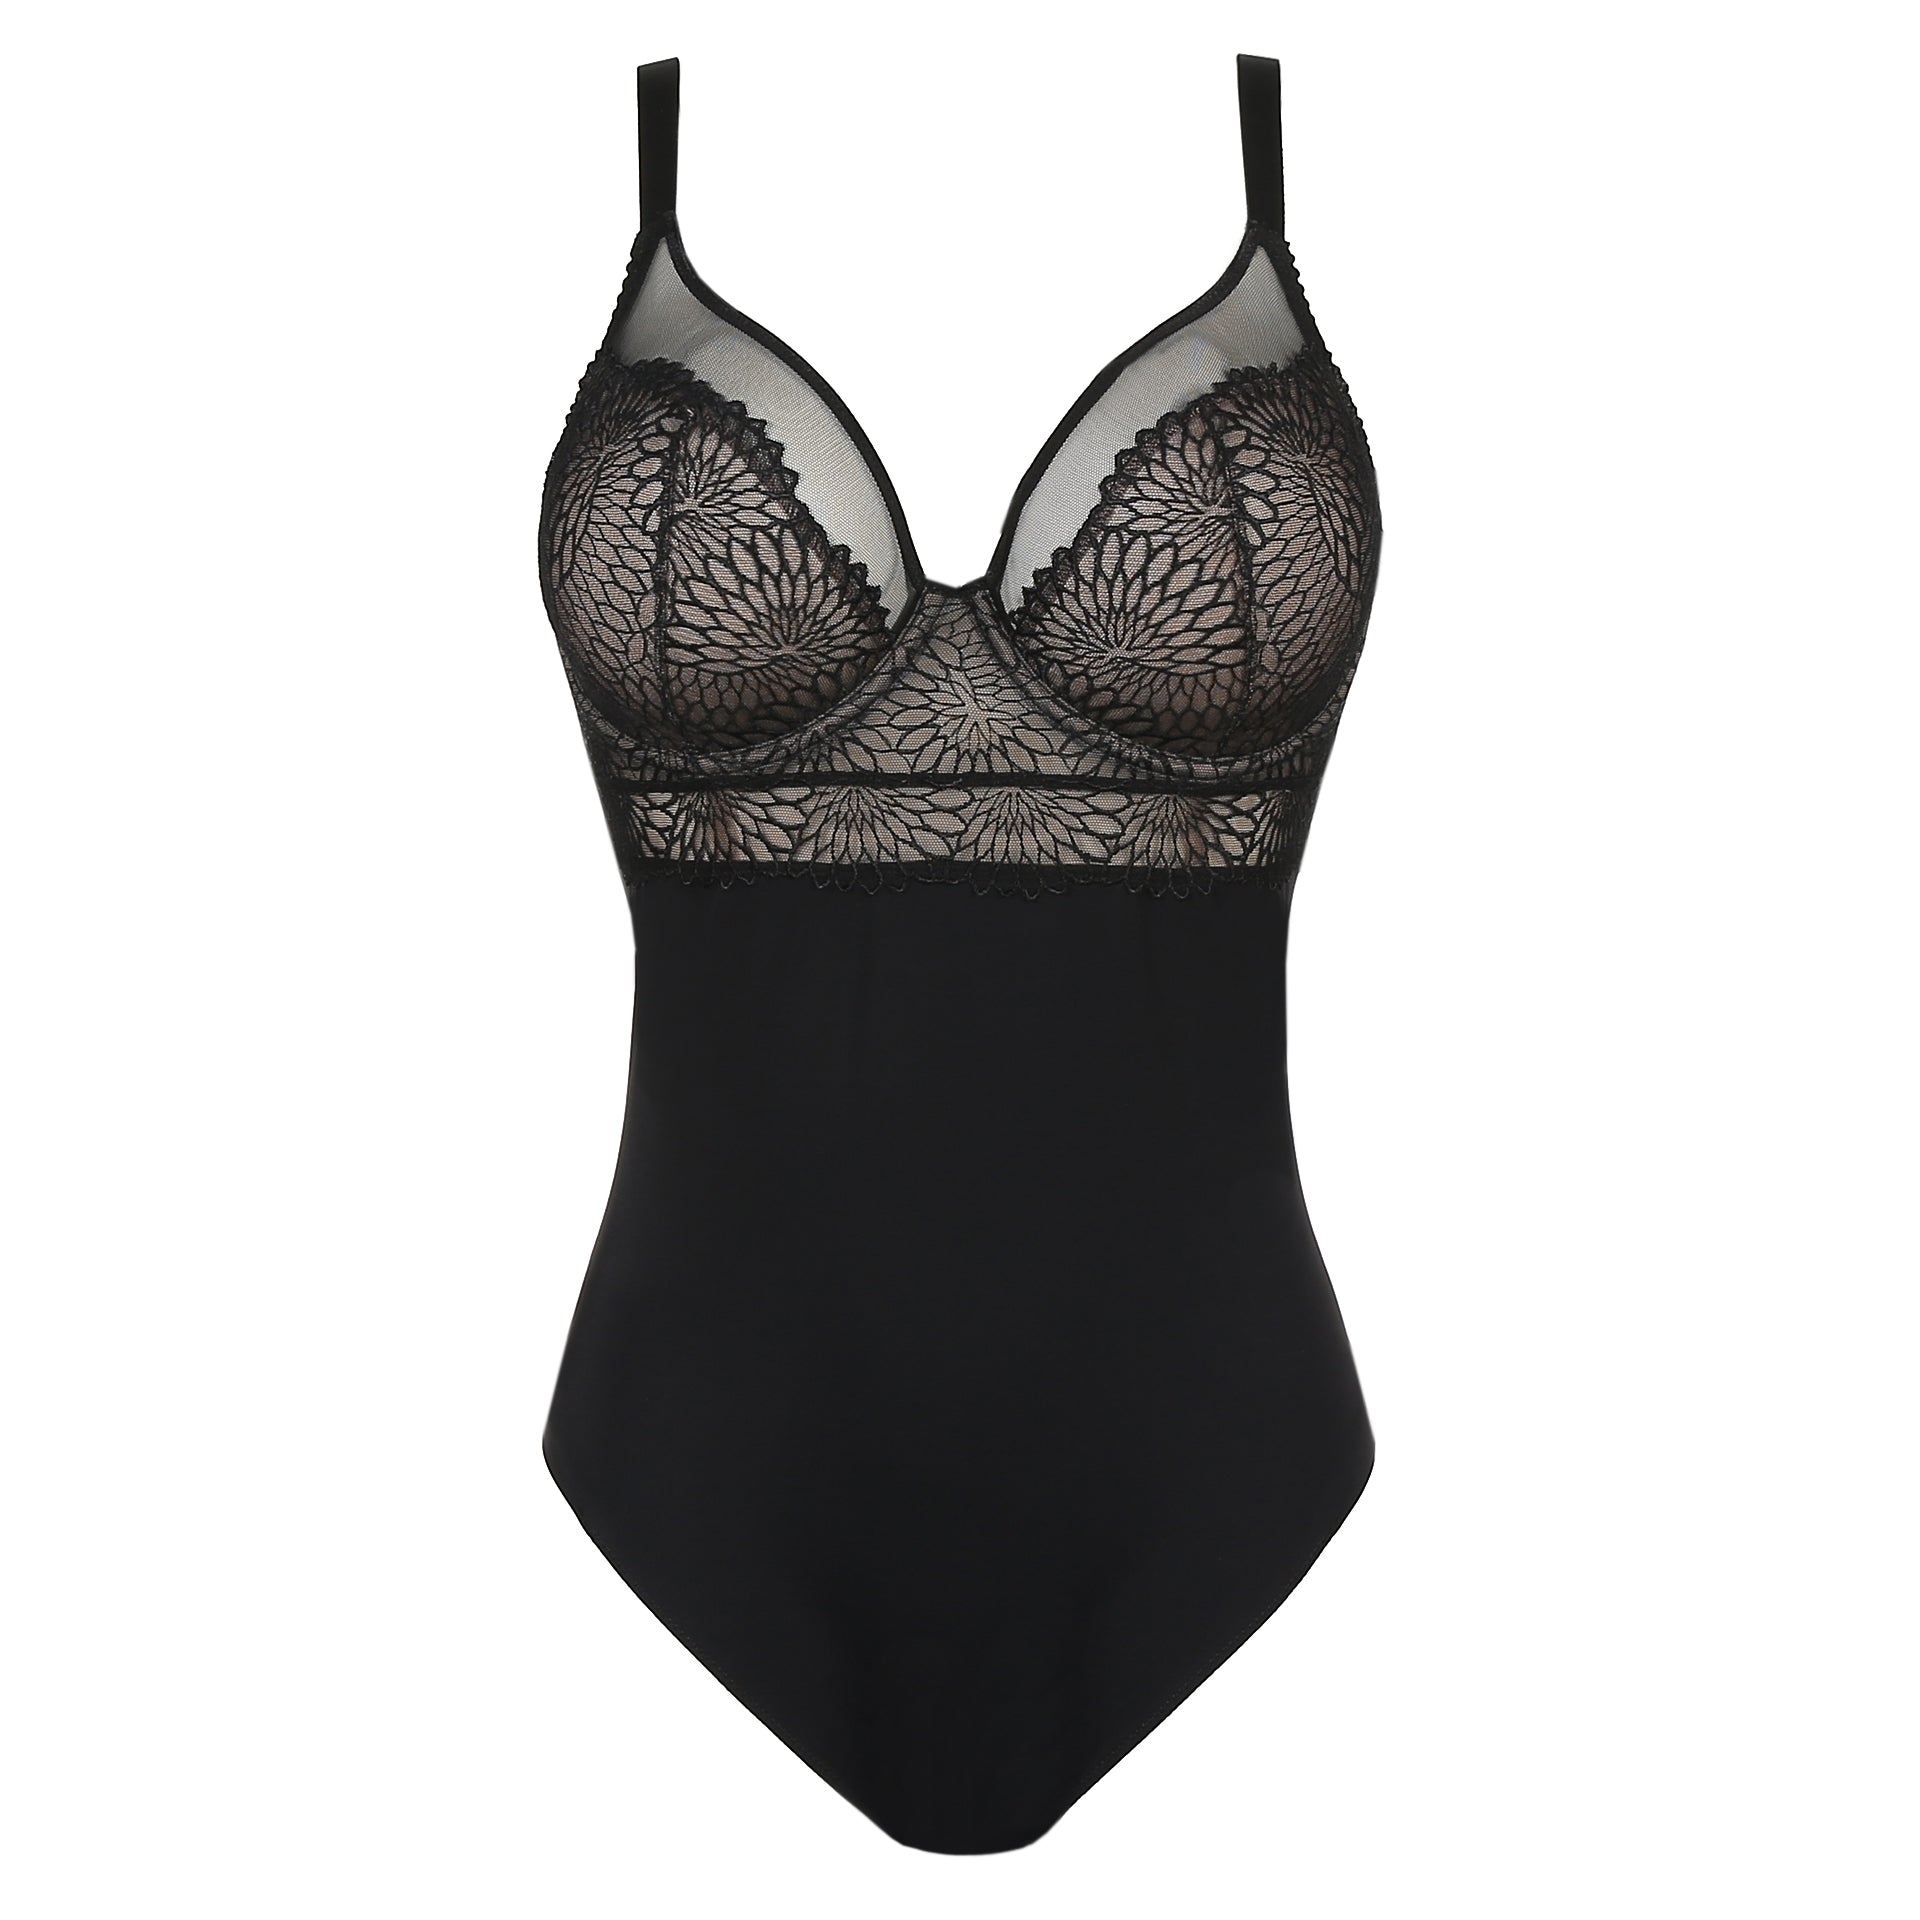 Black DD+ open back bodysuit with built in full support underwire bra by Primadonna.